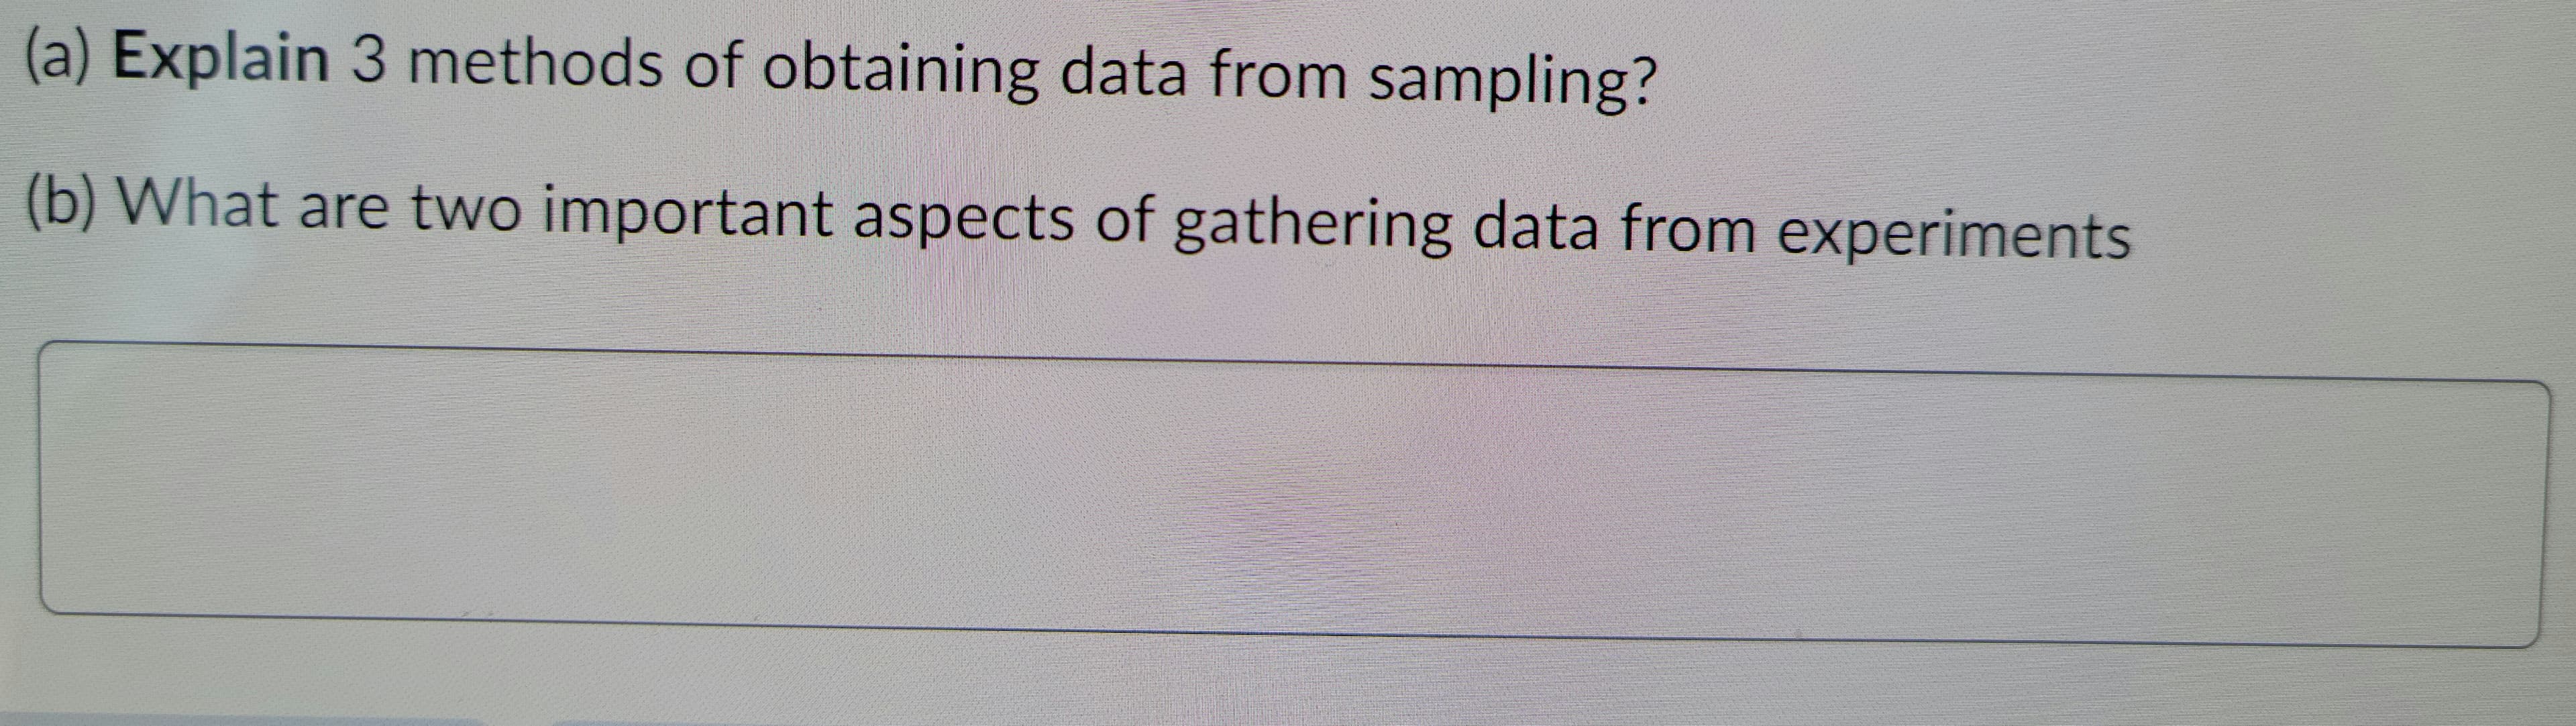 (a) Explain 3 methods of obtaining data from sampling?
(b) What are two important aspects of gathering data from experiments
